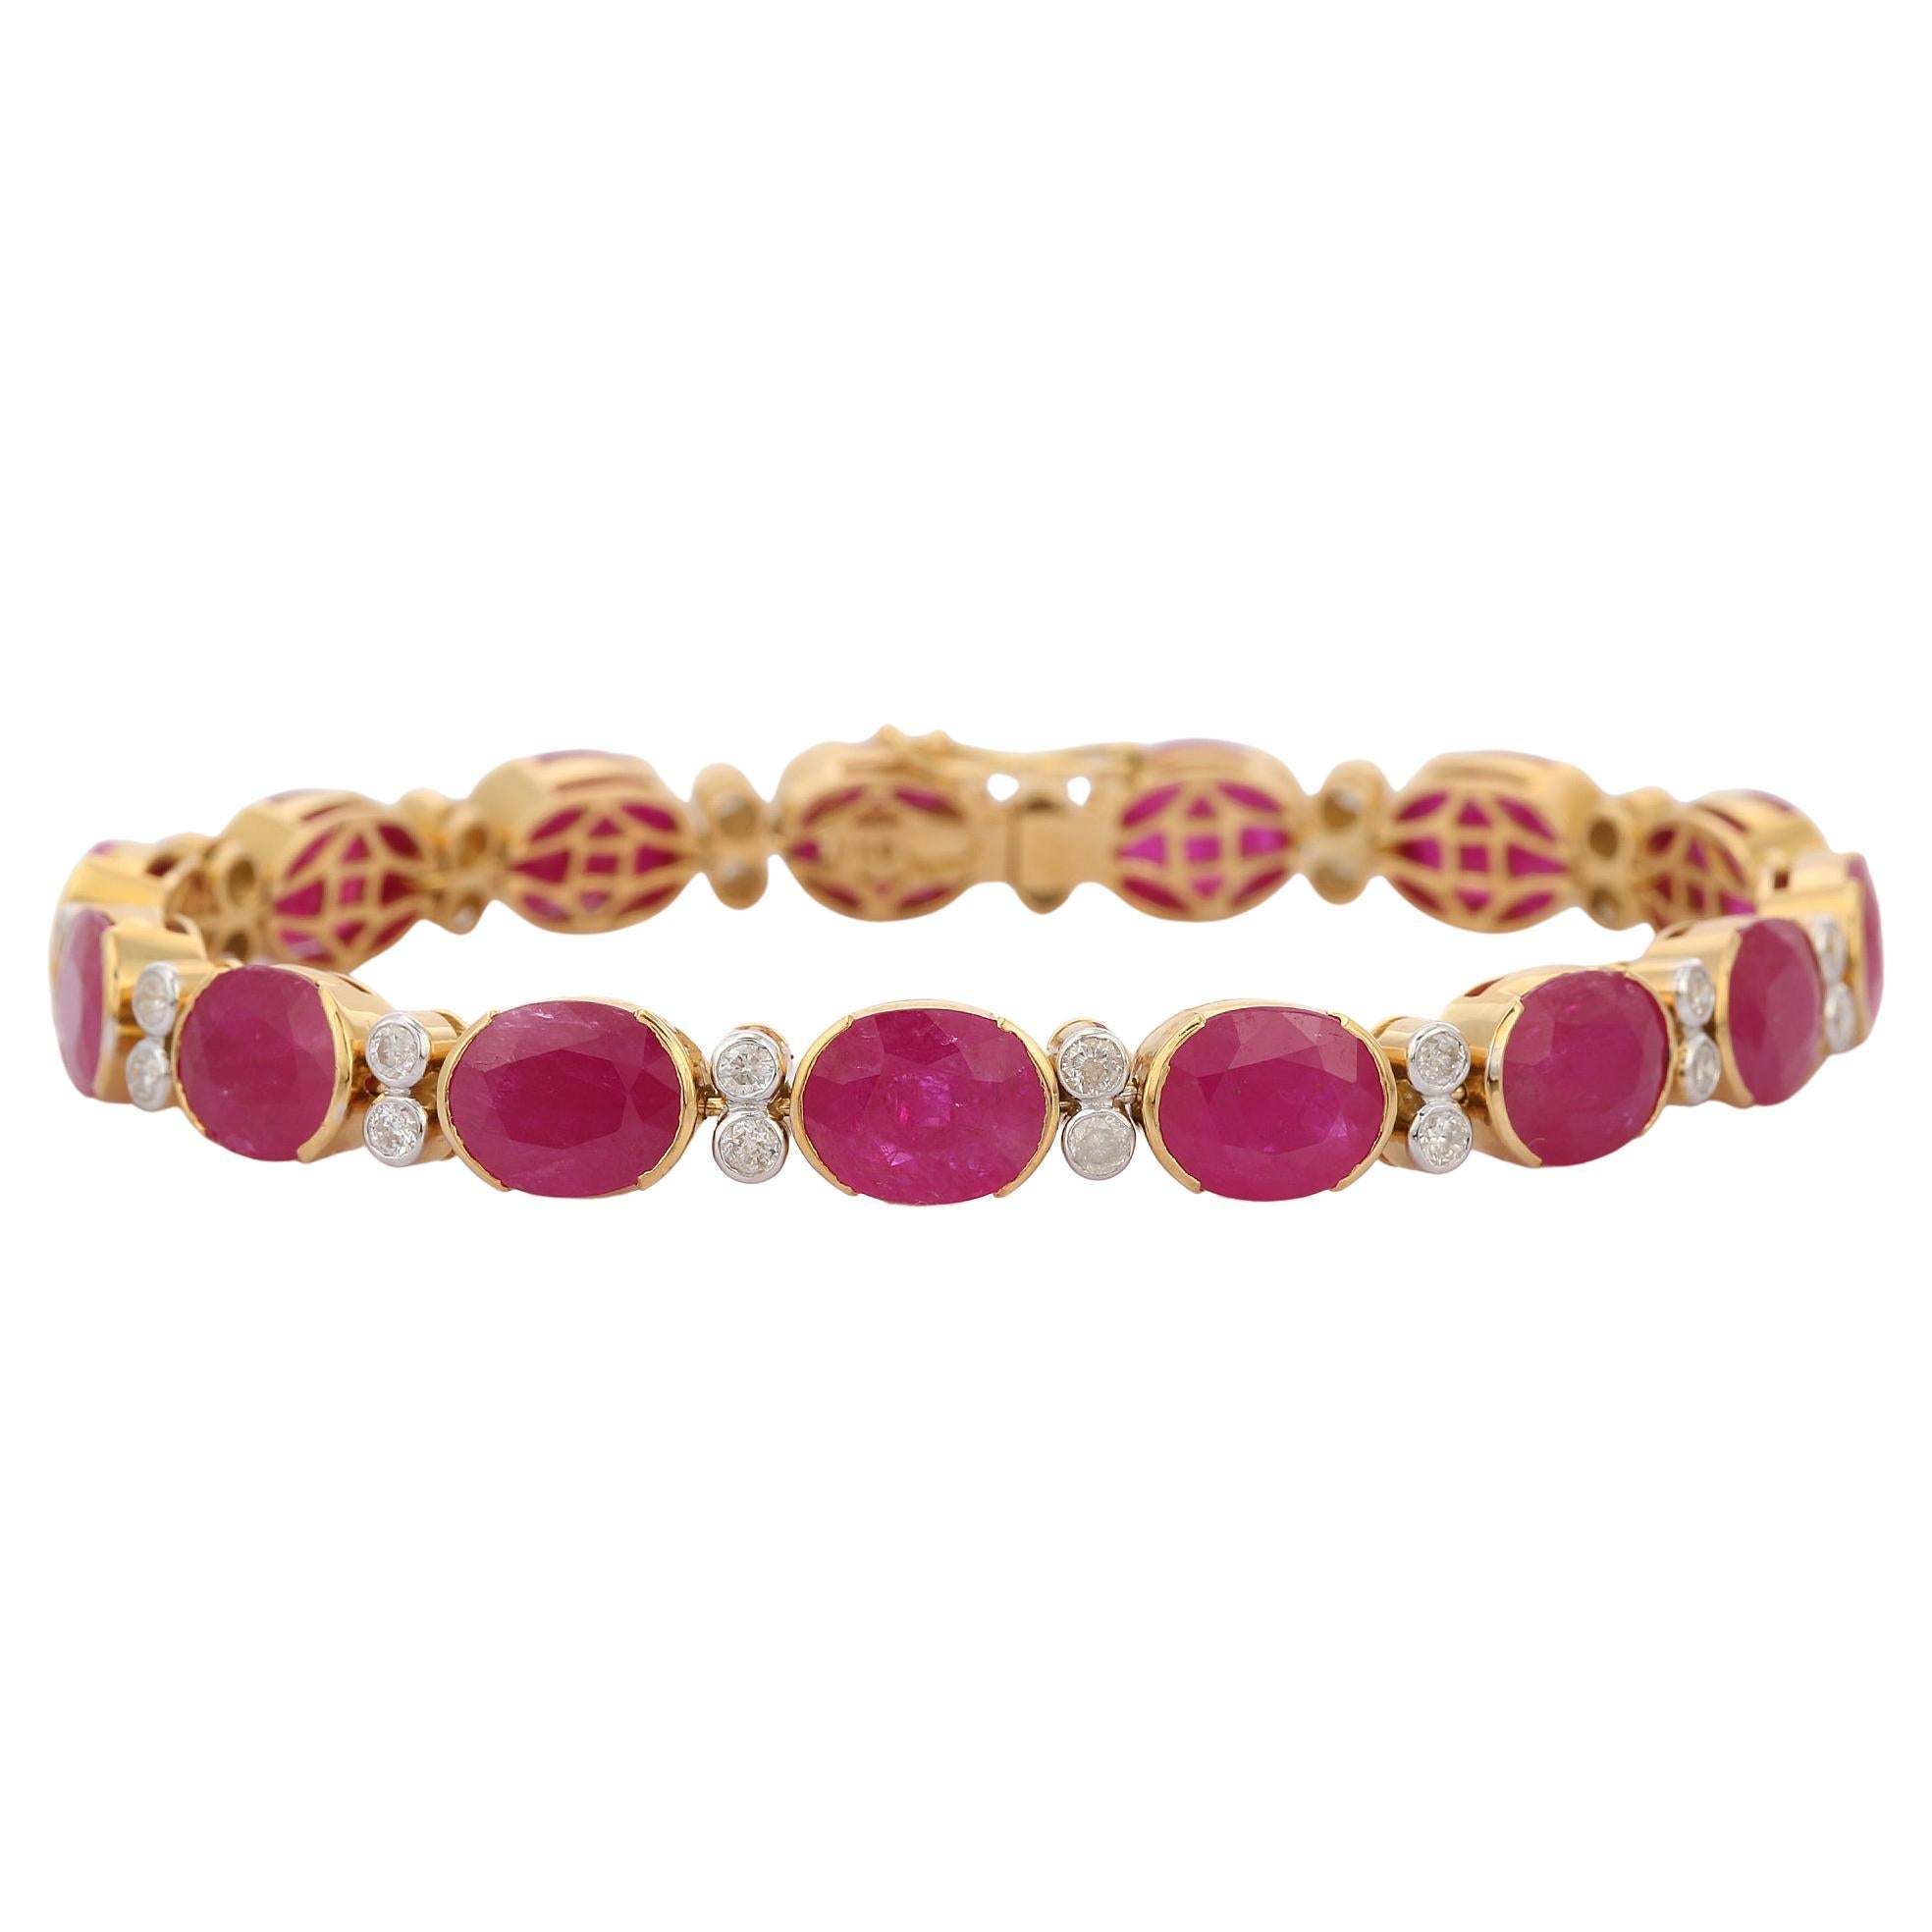 29.6 Cts Oval Cut Ruby and Diamond Bracelet in 18K Yellow Gold 